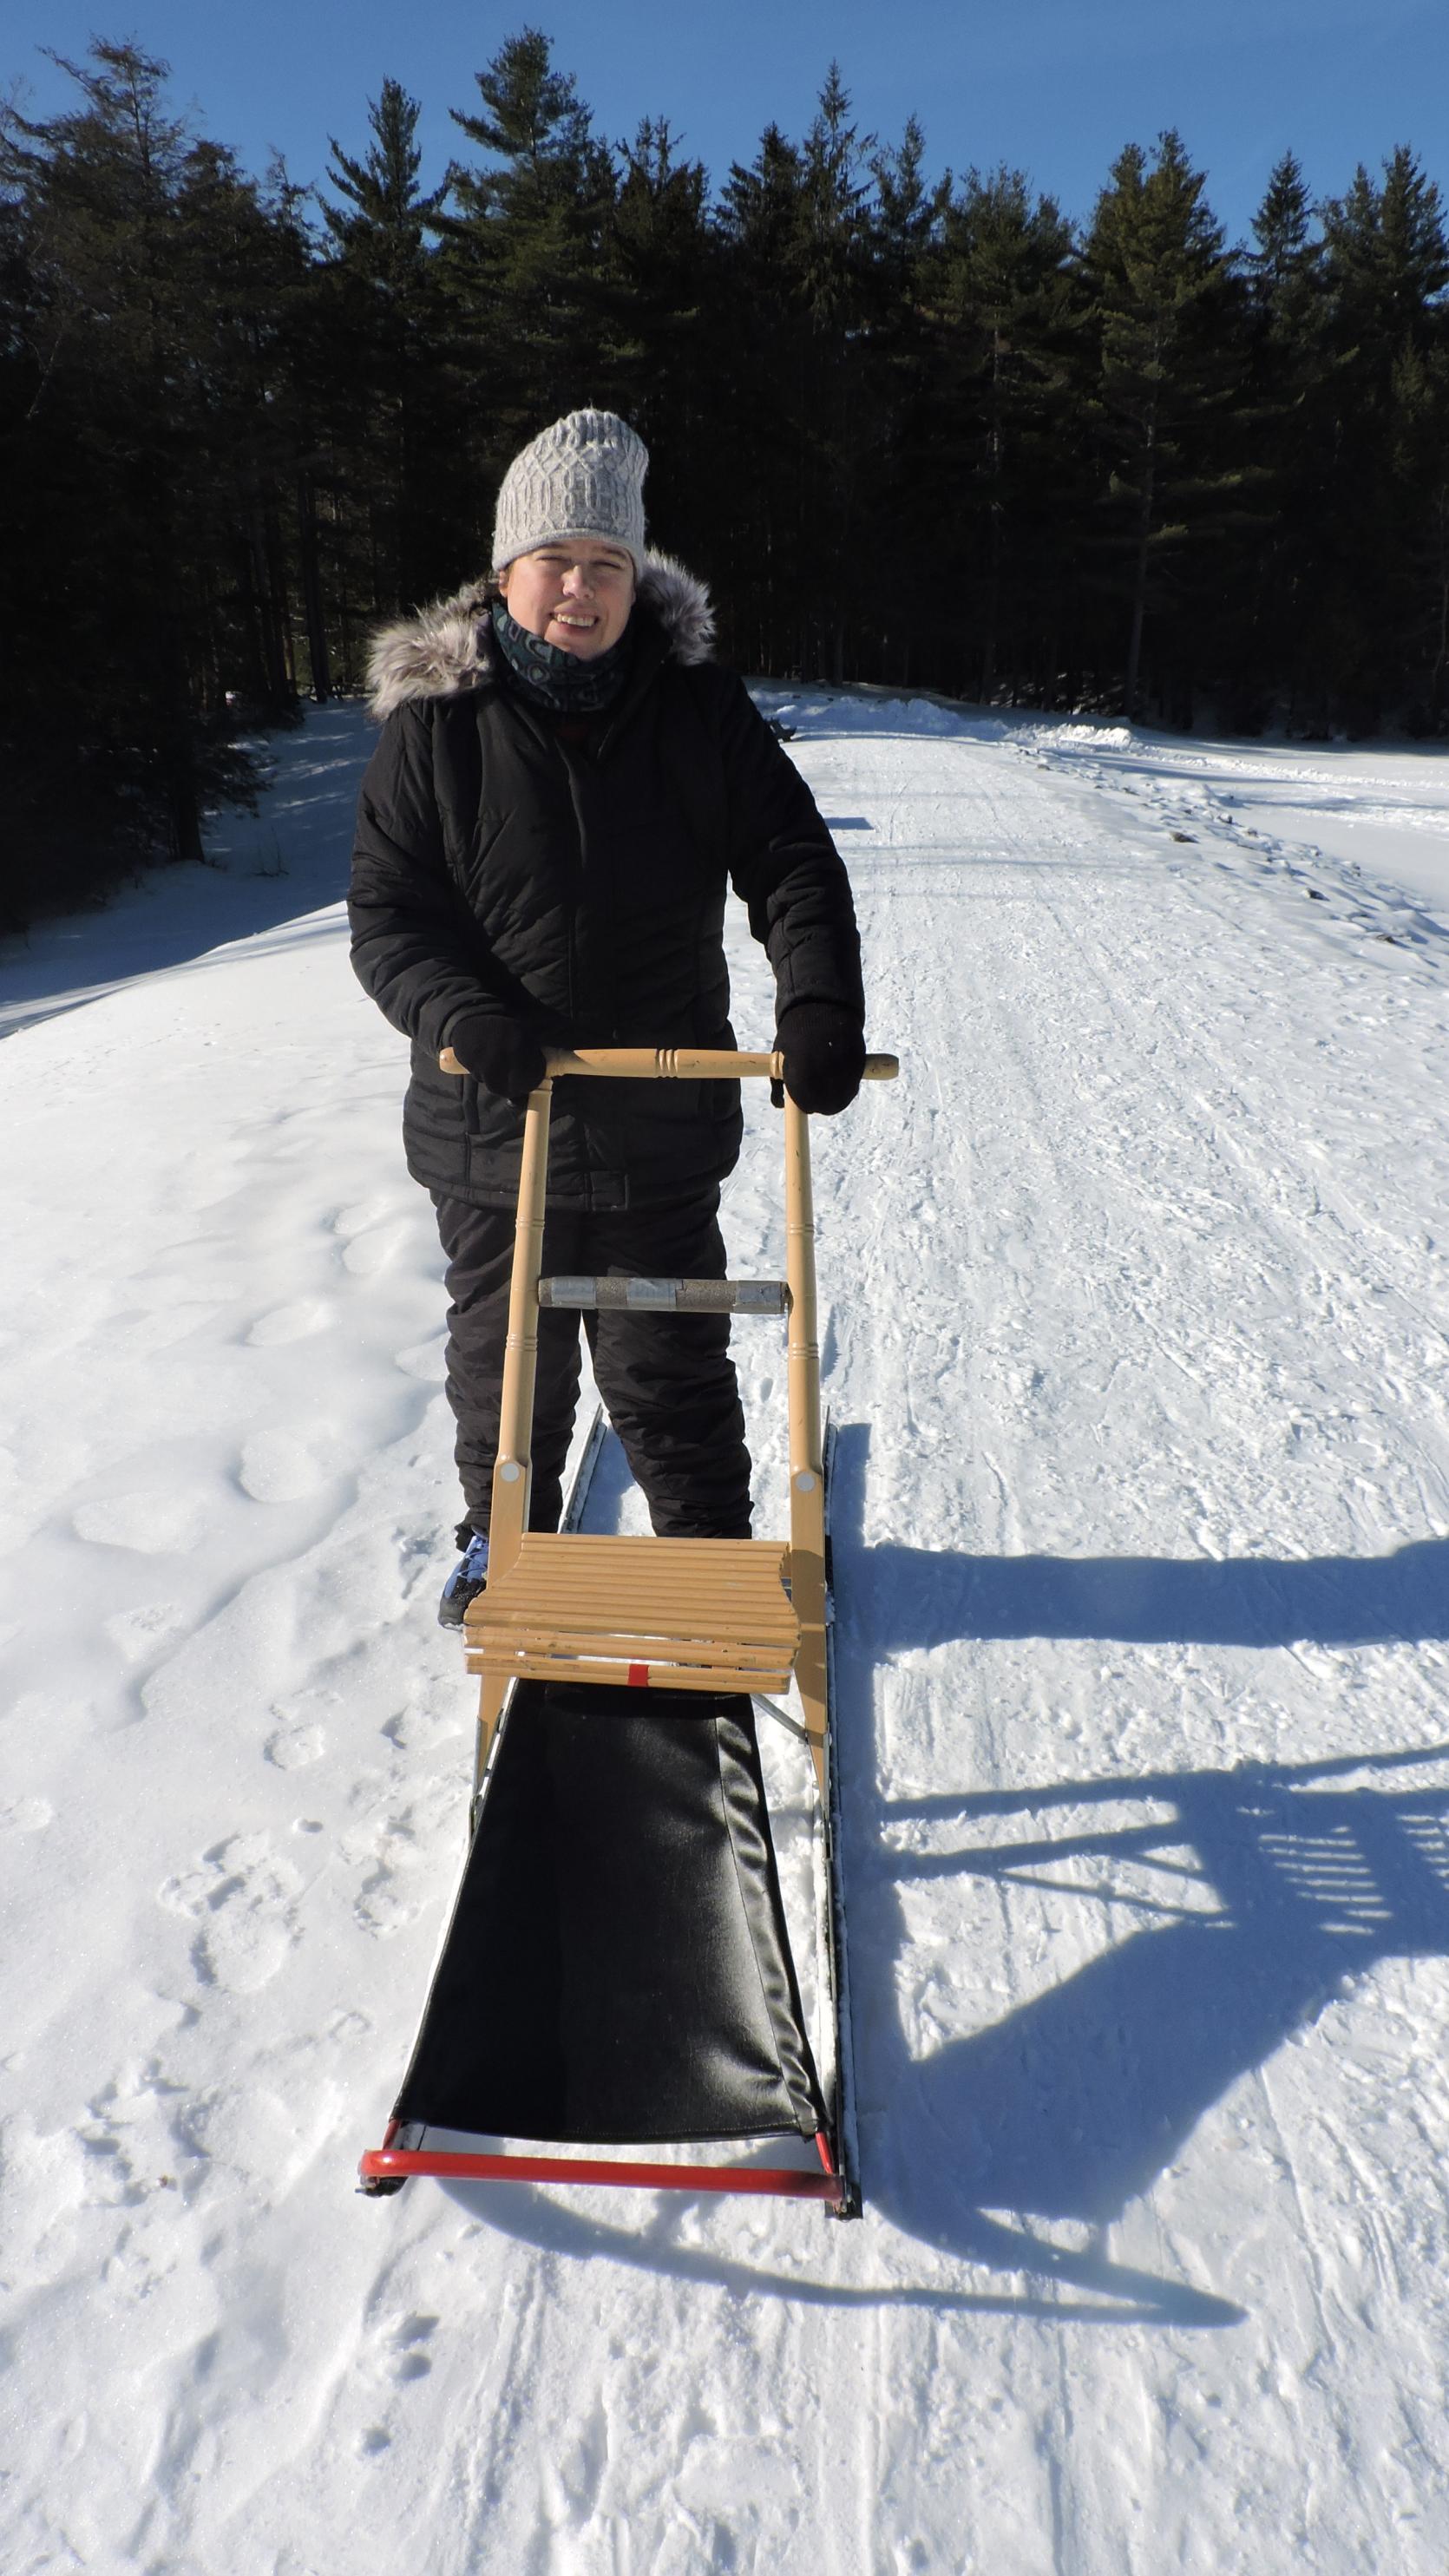 A person standing behind a kick sled on a snowy trail on a sunny day.